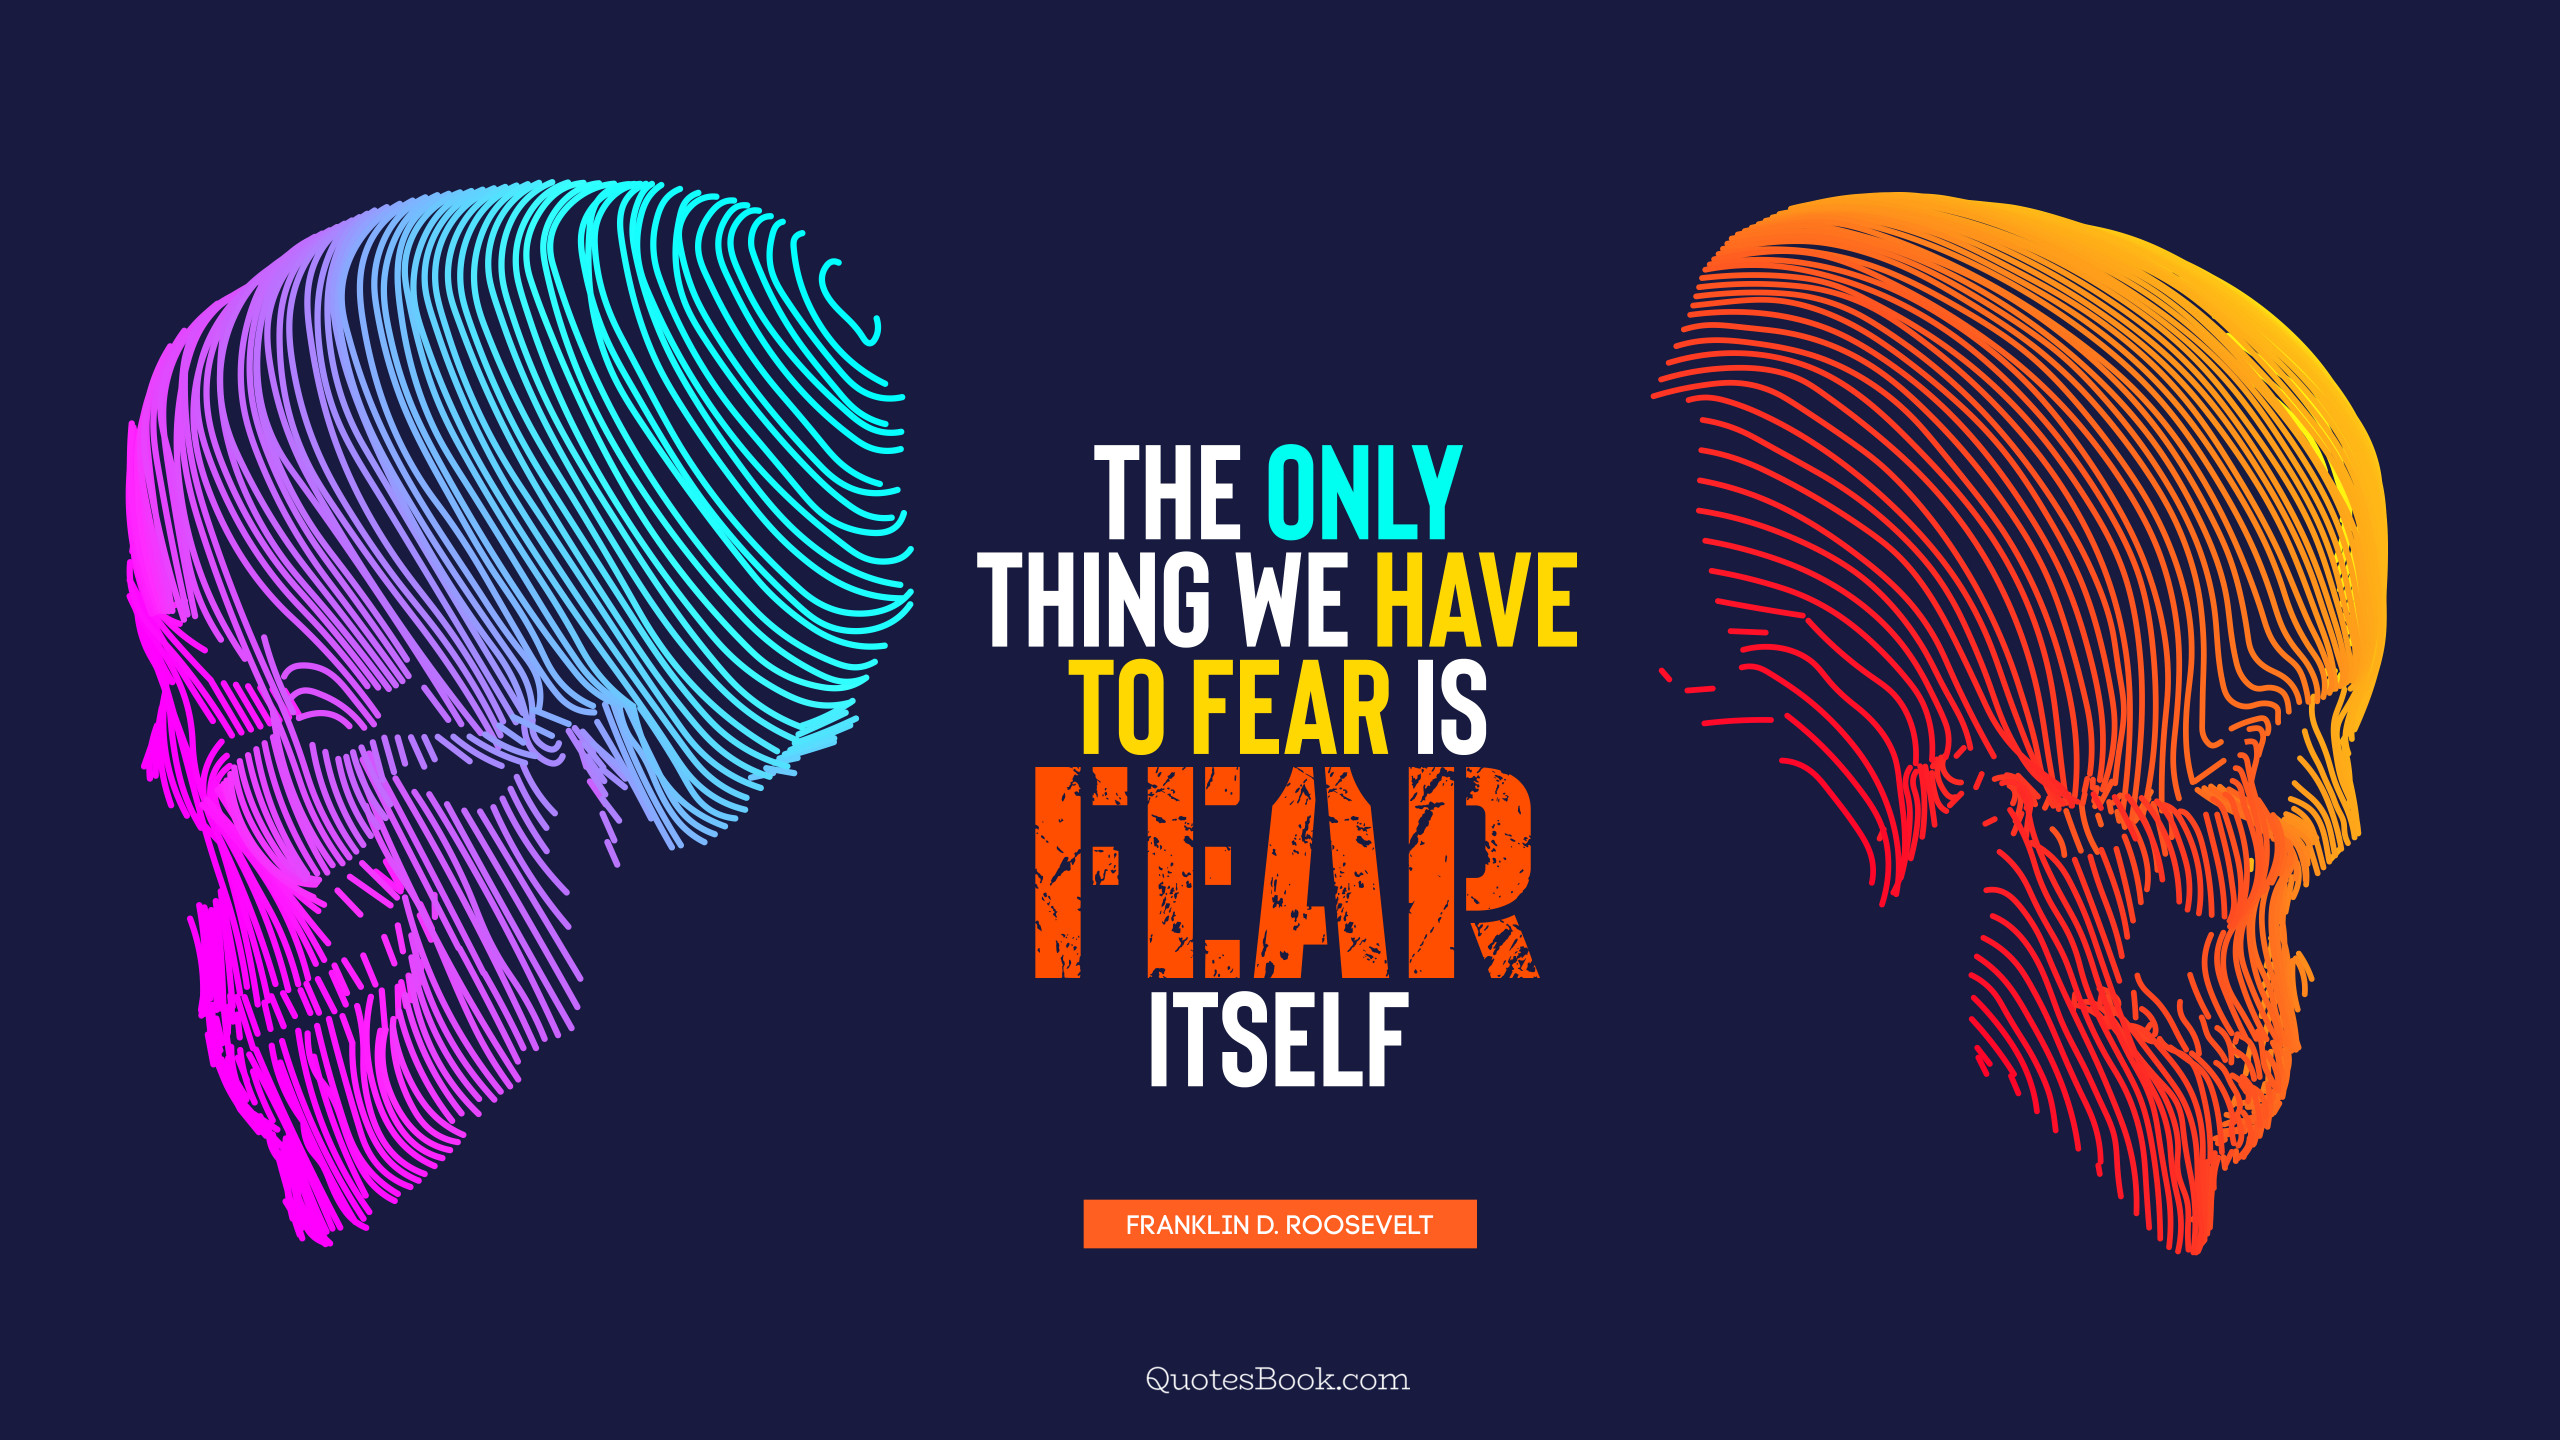 The only thing we have to fear is fear itself. - Quote by Franklin D